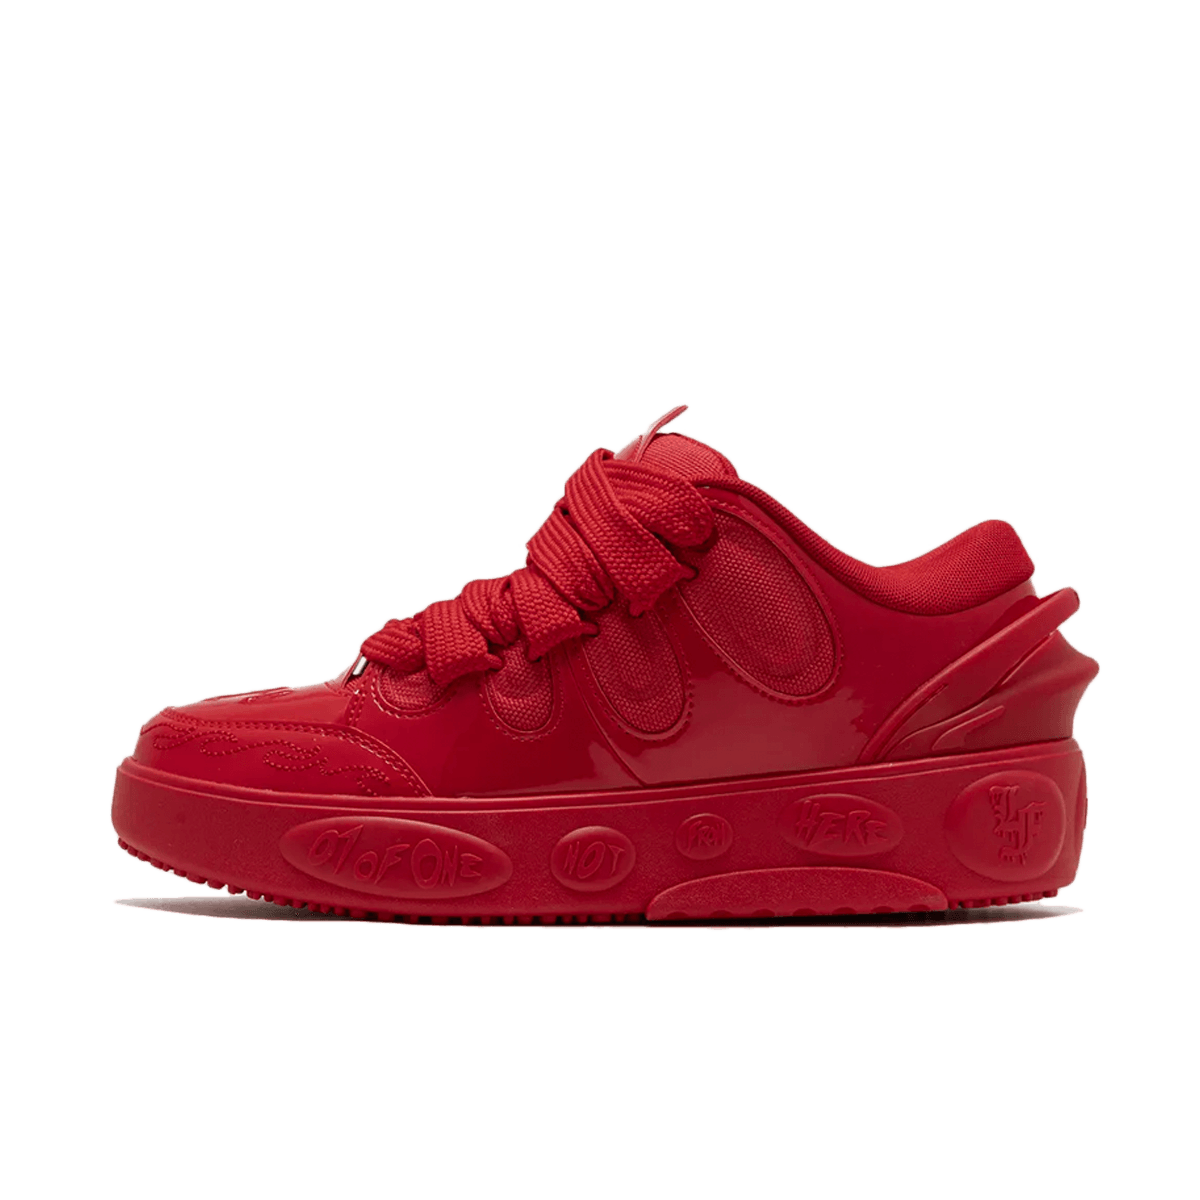 LaFrancé x Puma Hoops Amour 'For All Time Red' 310439-03